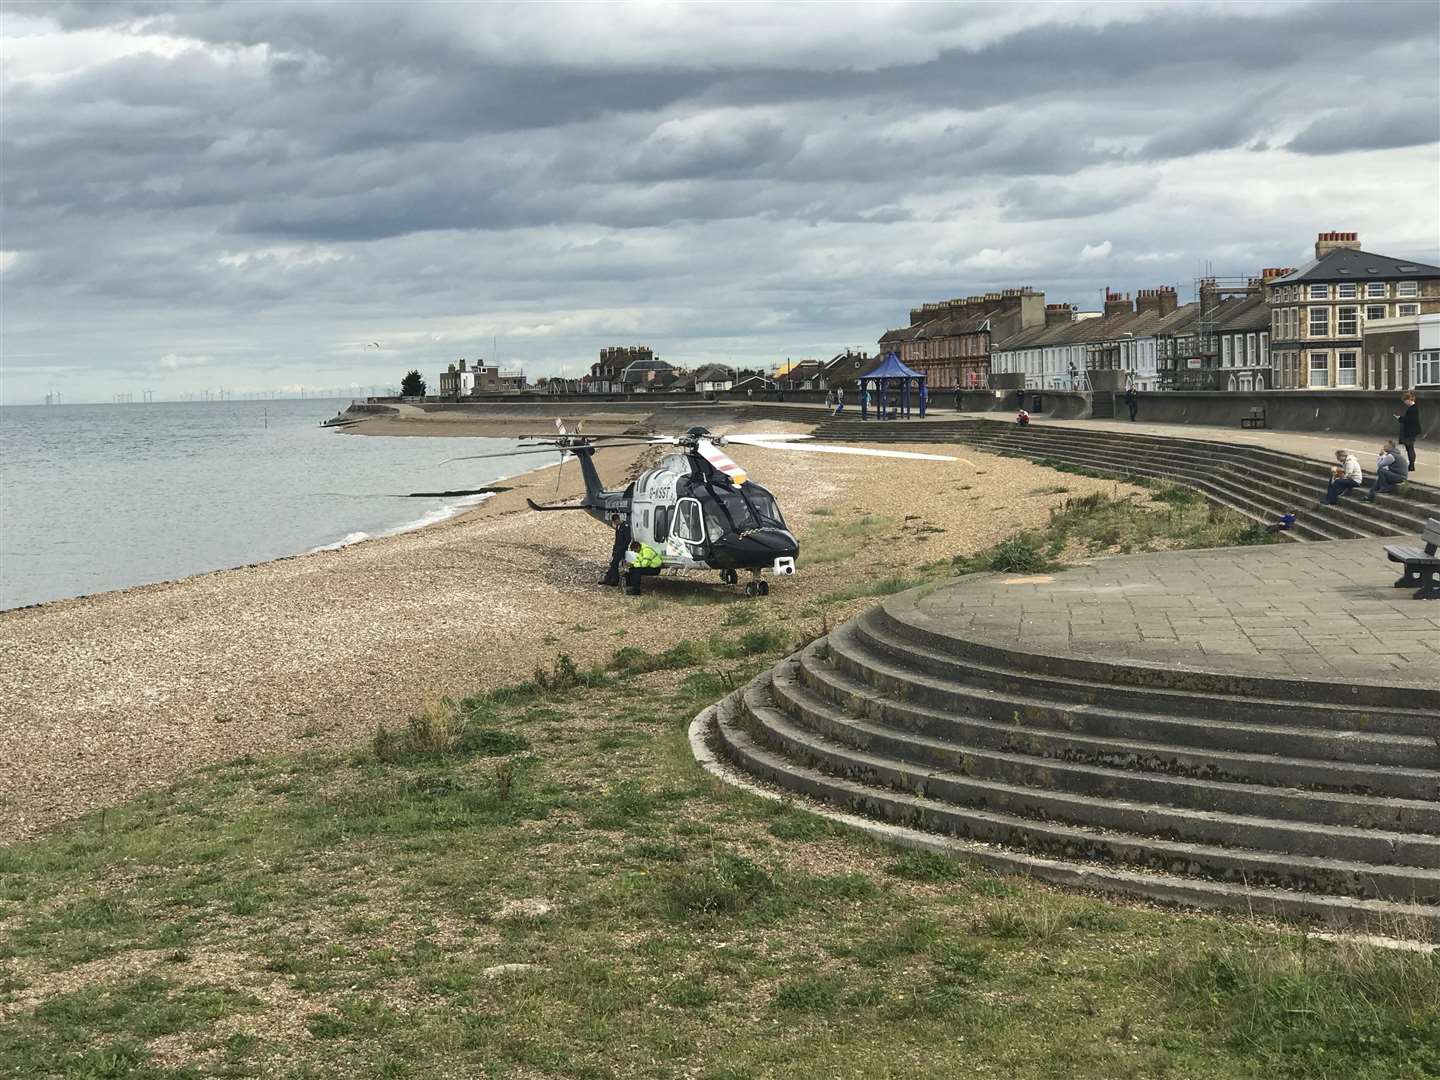 The air ambulance on the beach off Marine Parade, Sheerness